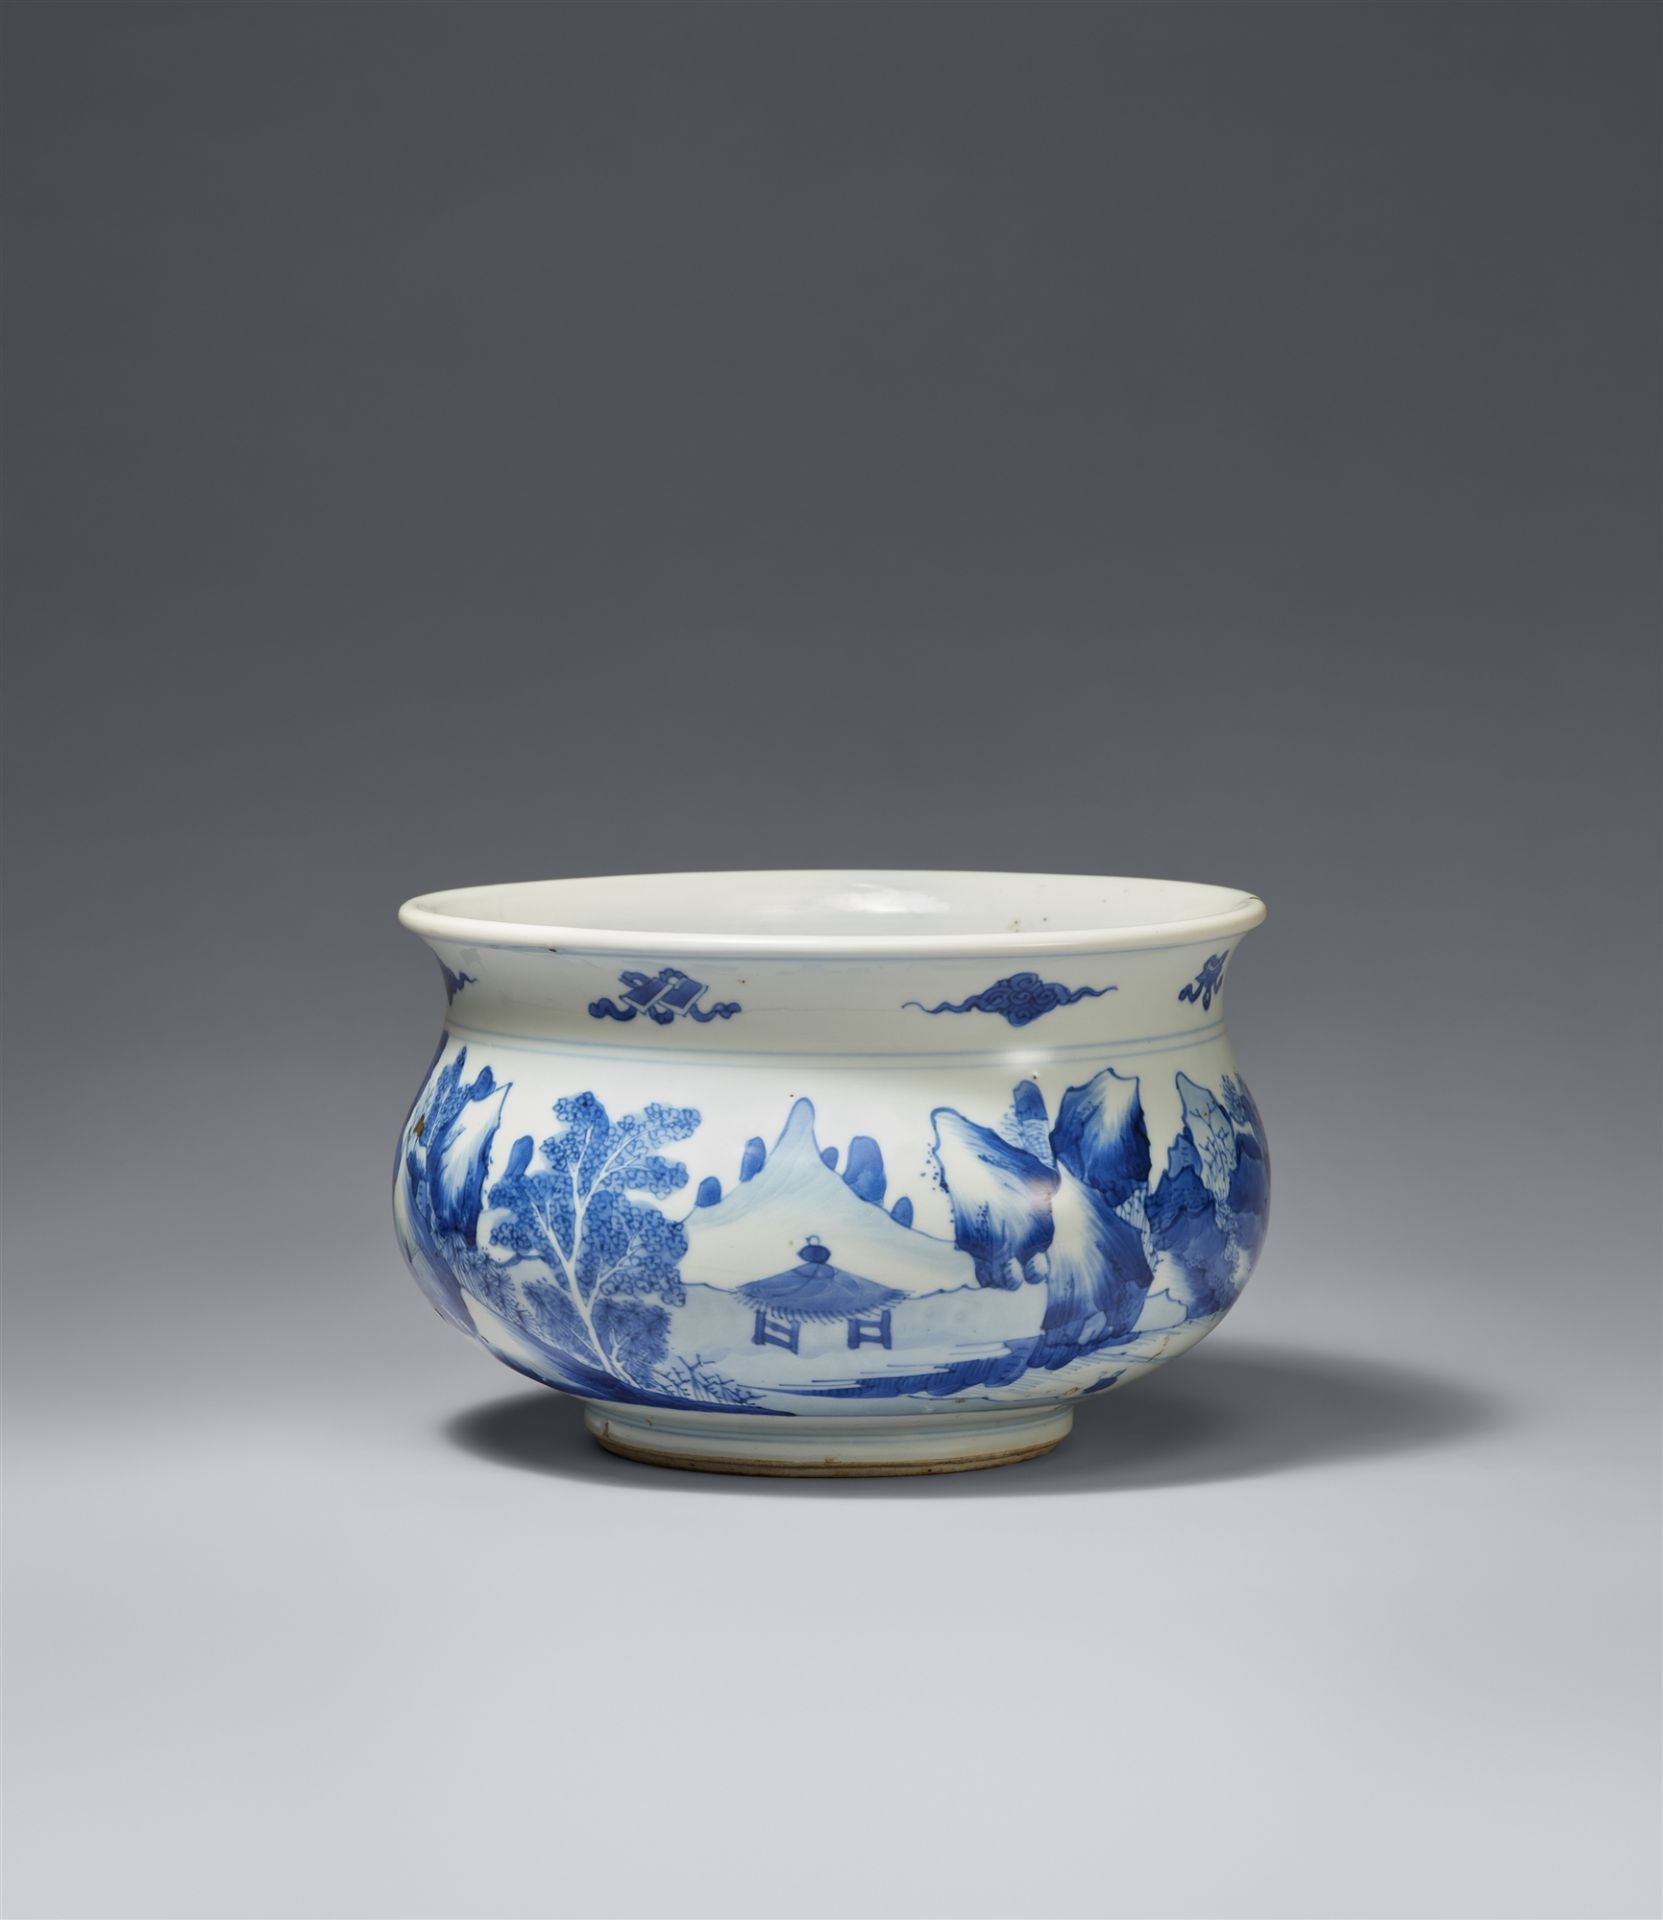 A blue and white incense burner. Kangxi period (1662-1722)